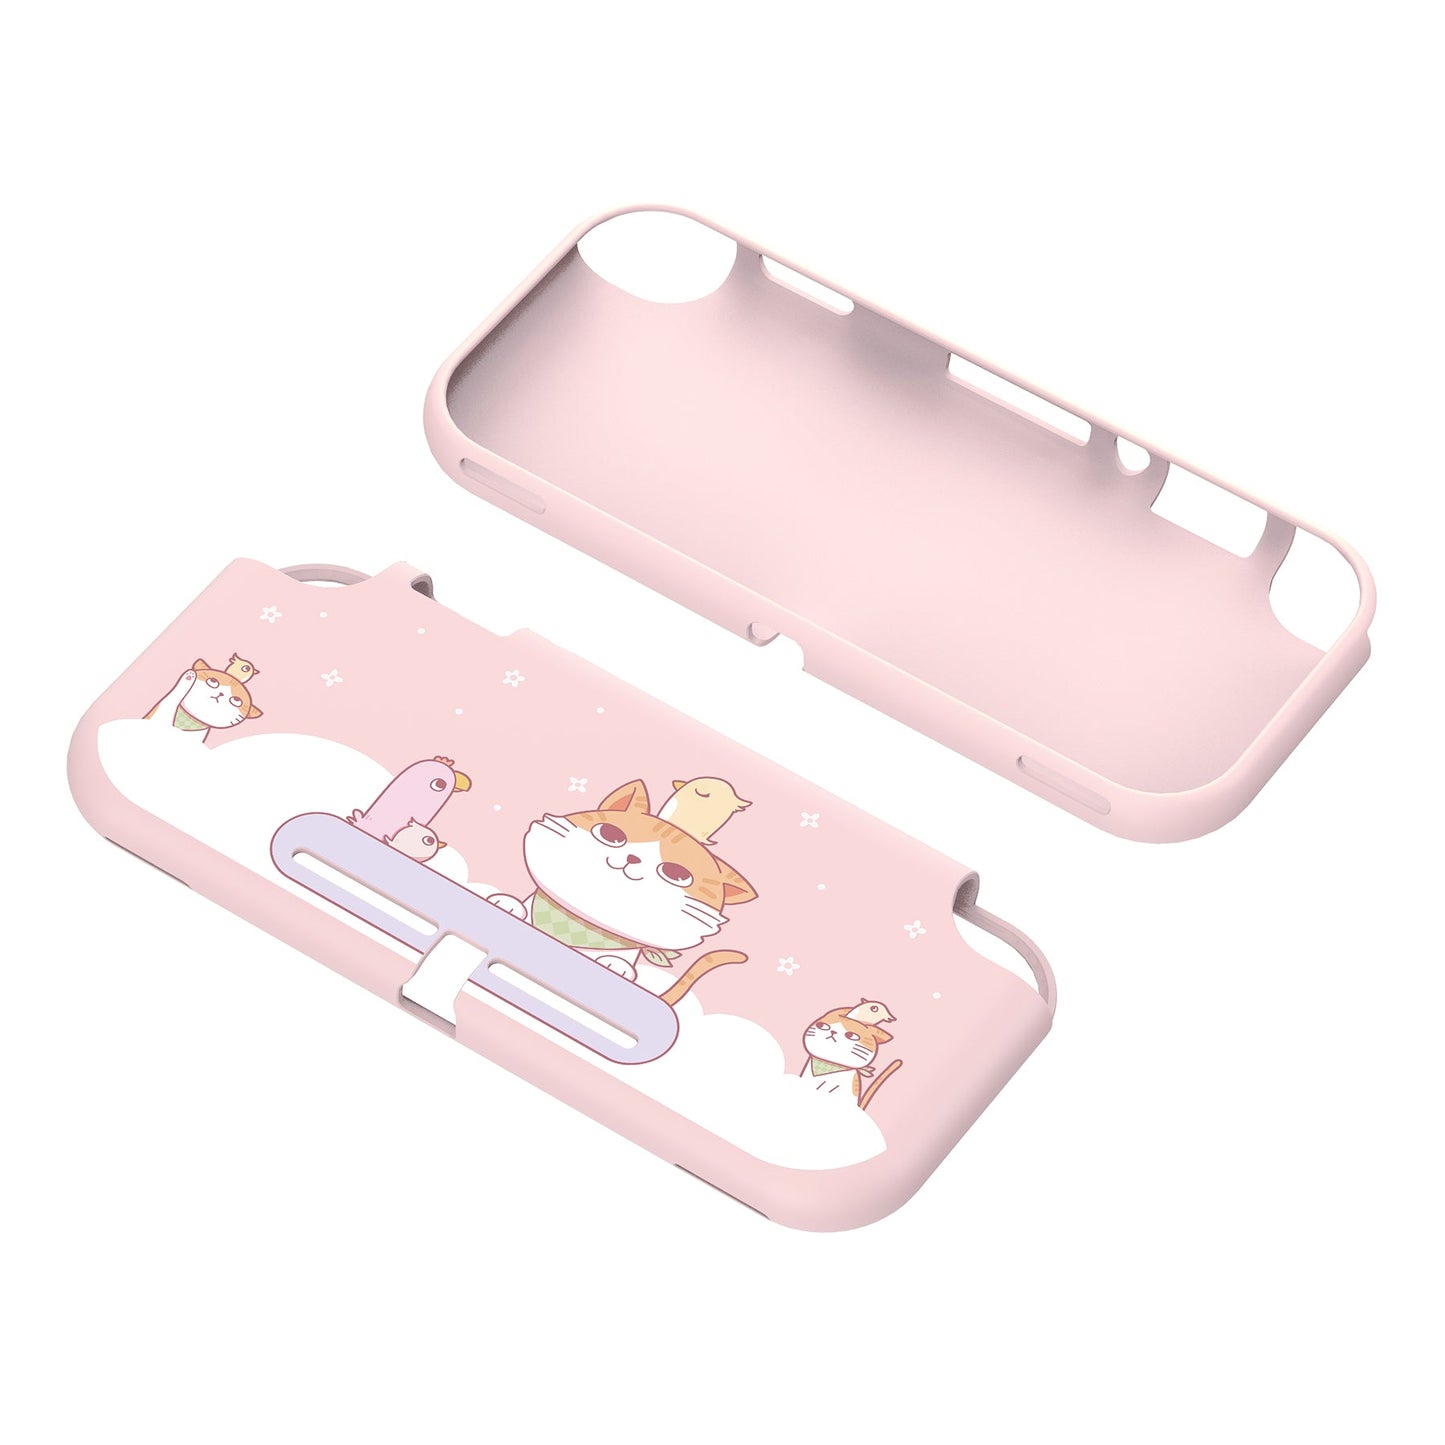 PlayVital Kitten & Chicken Custom Protective Case for NS Switch Lite, Soft TPU Slim Case Cover for NS Switch Lite - LTU6001 PlayVital